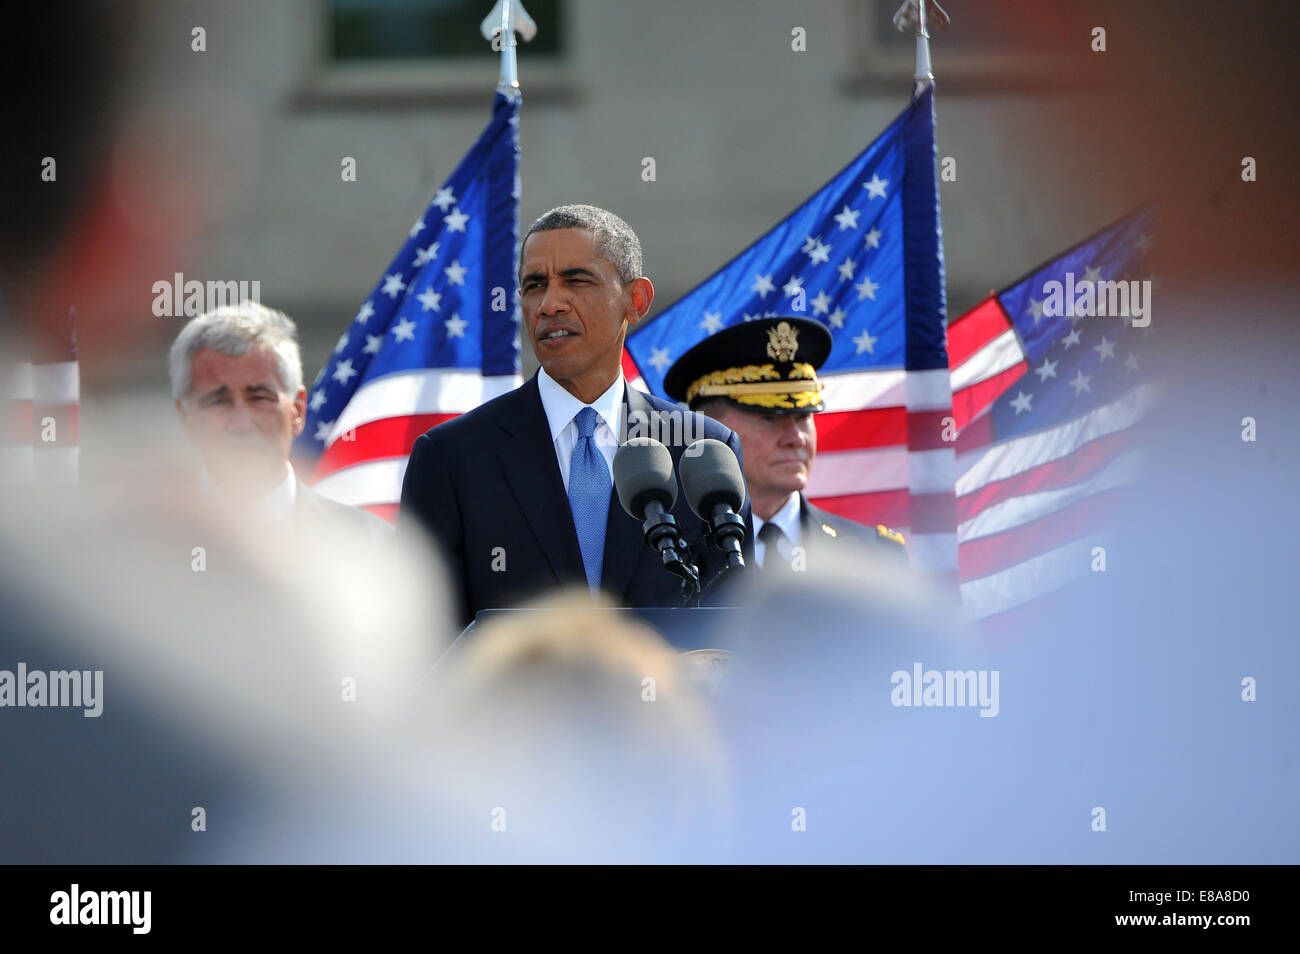 President Barack Obama speaks during the 9/11 memorial ceremony at the National 9/11 Pentagon Memorial at the Pentagon in Arlington, Va., Sept. 11, 2014. Terrorists hijacked four passenger aircraft Sept. 11, 2001. Two of the aircraft were deliberately cra Stock Photo